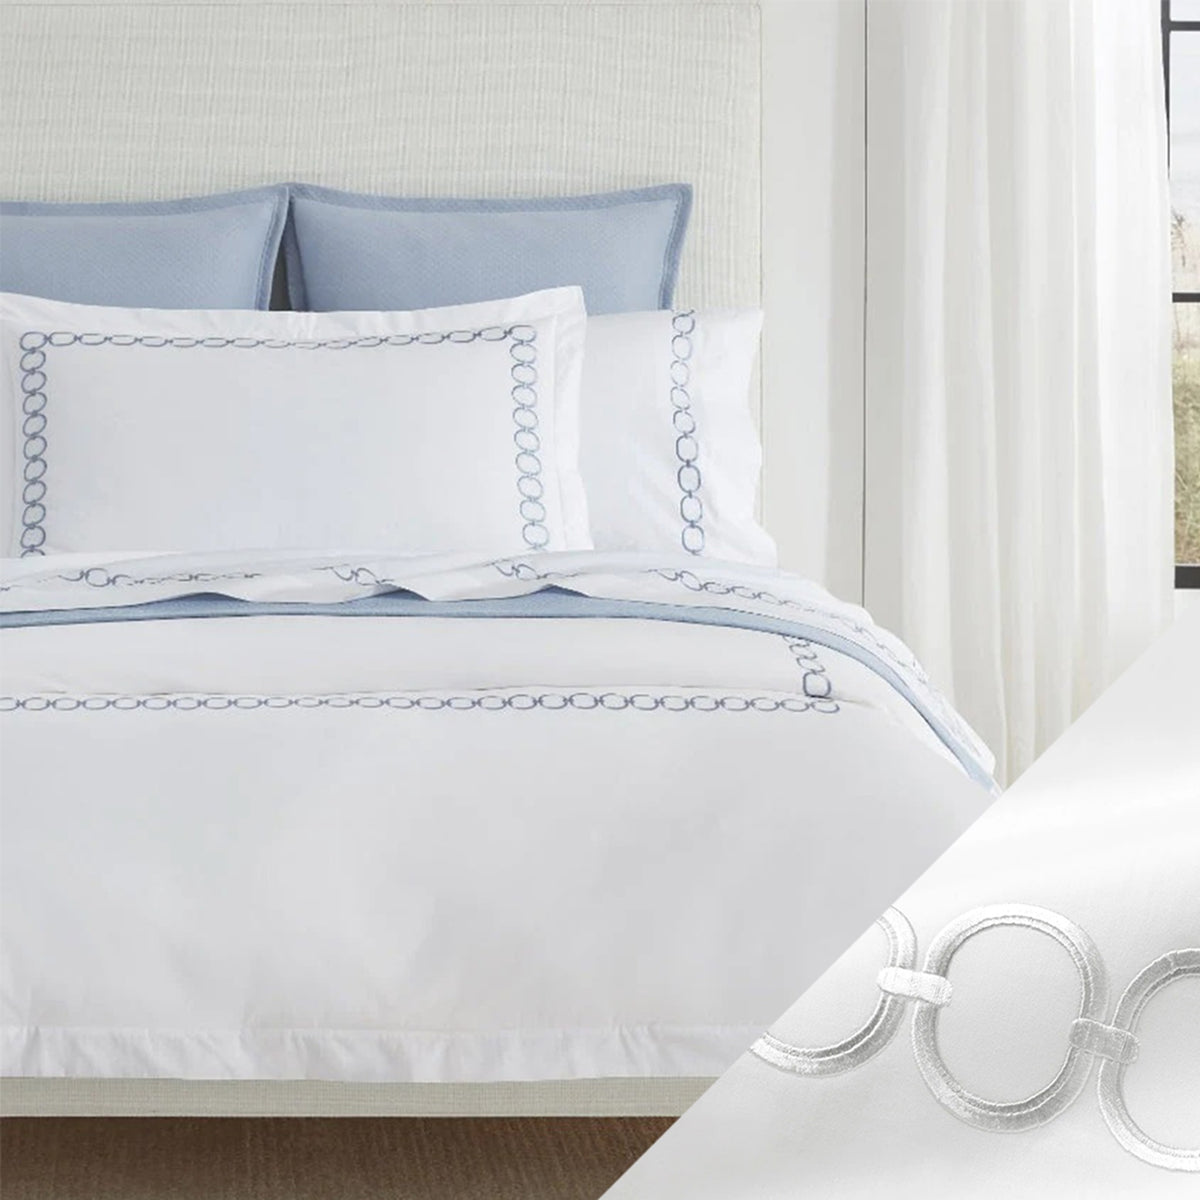 Bed Dressed in Sferra Catena Bedding with Swatch in White/Lunar Color